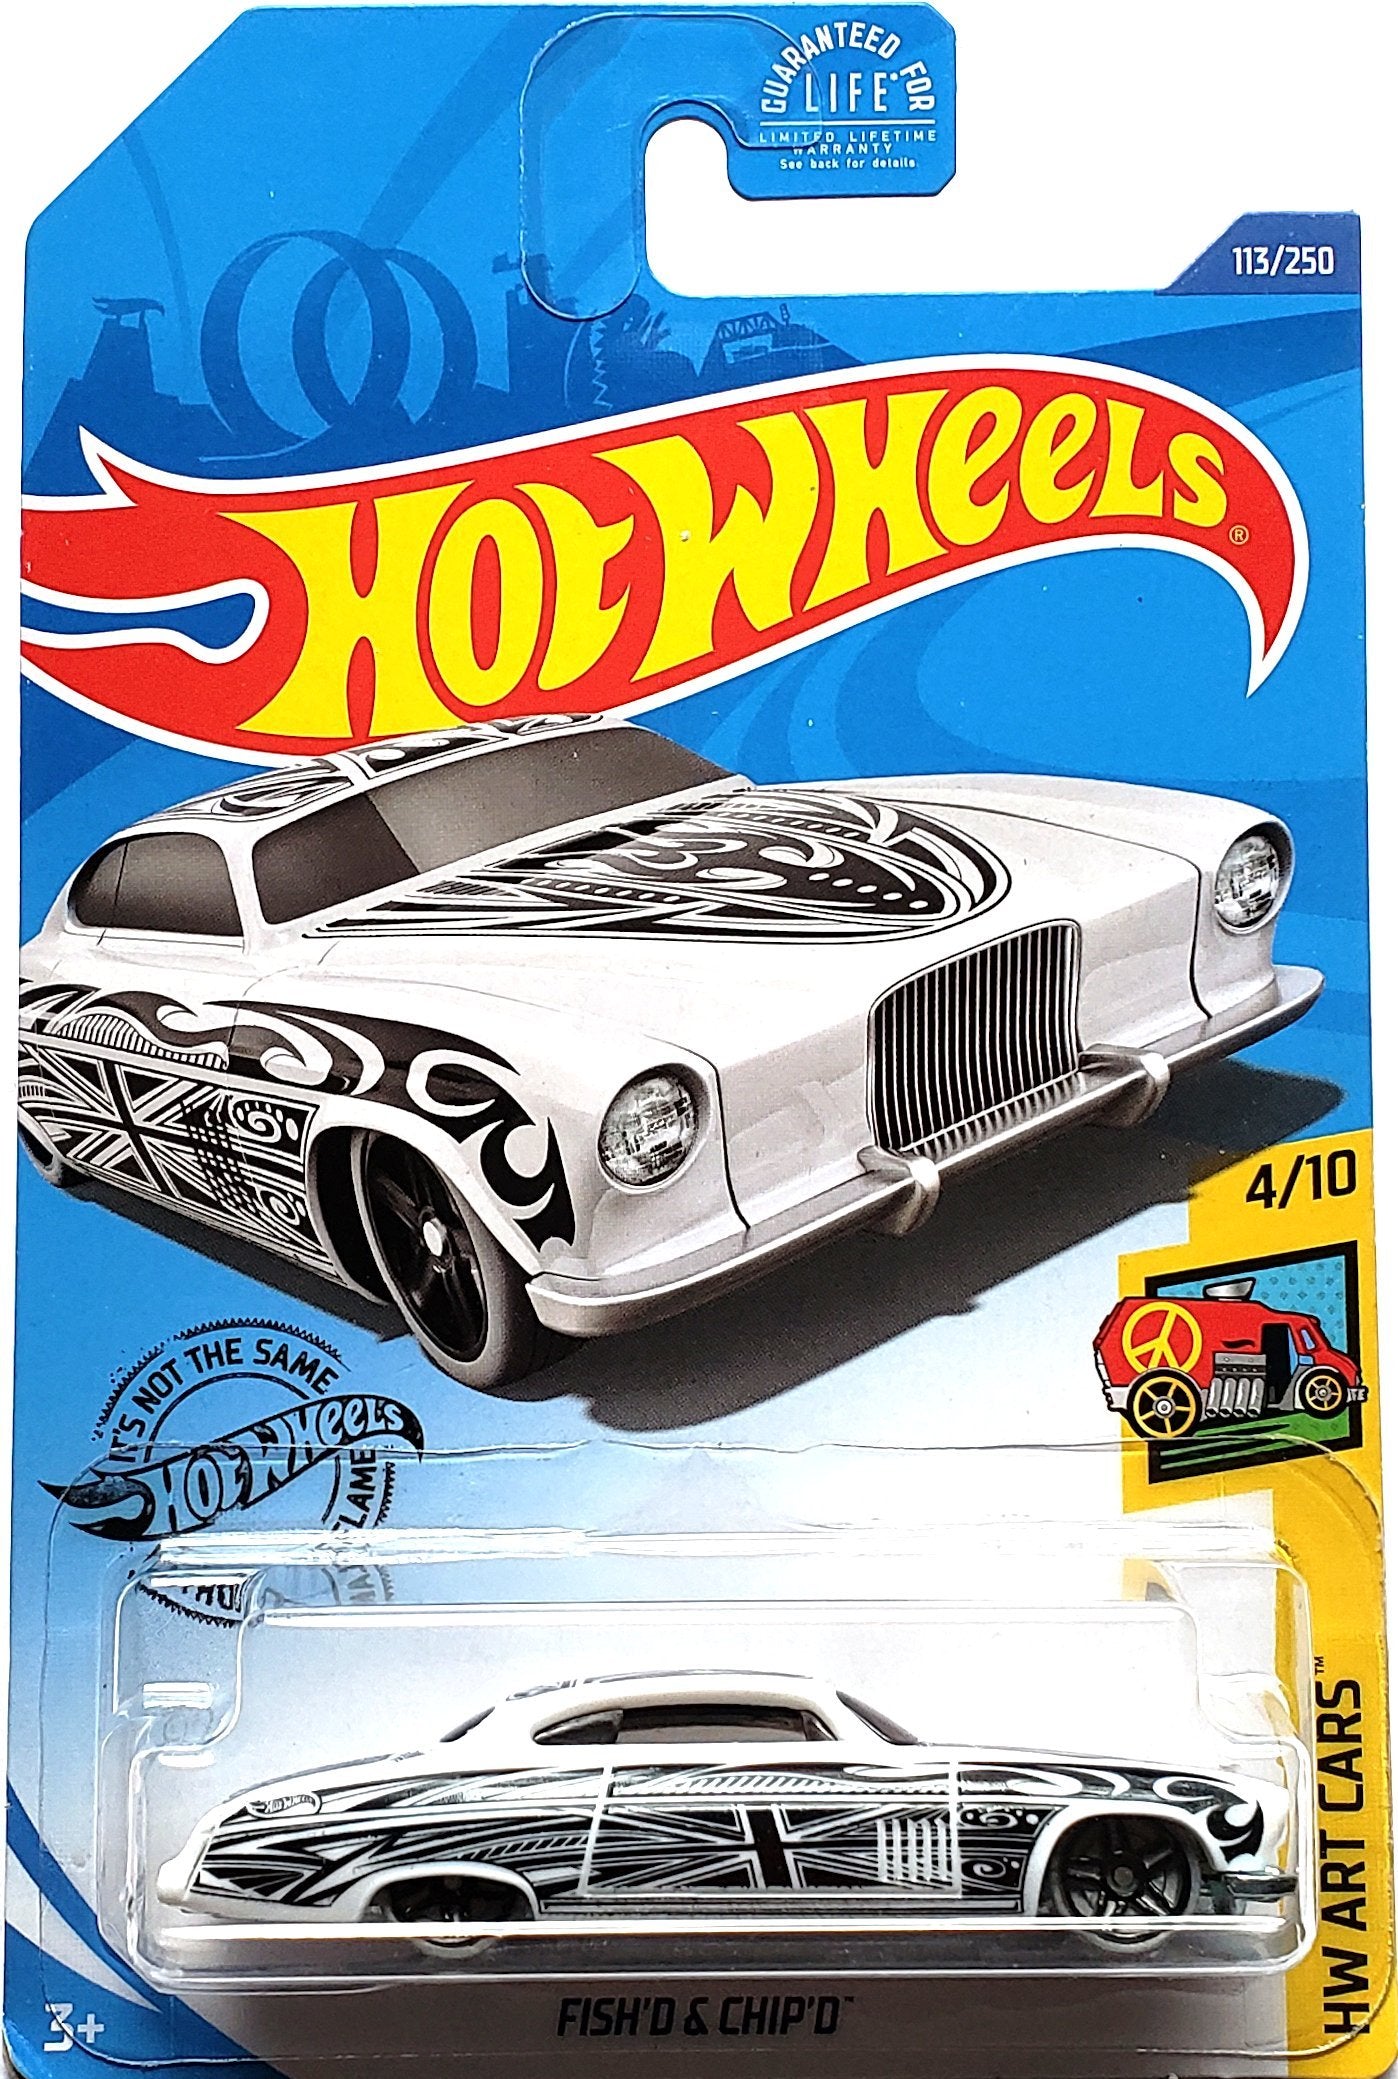 2020 Hot Wheels Mainline #113 - Fish'd and Chip'd (White) GHC16